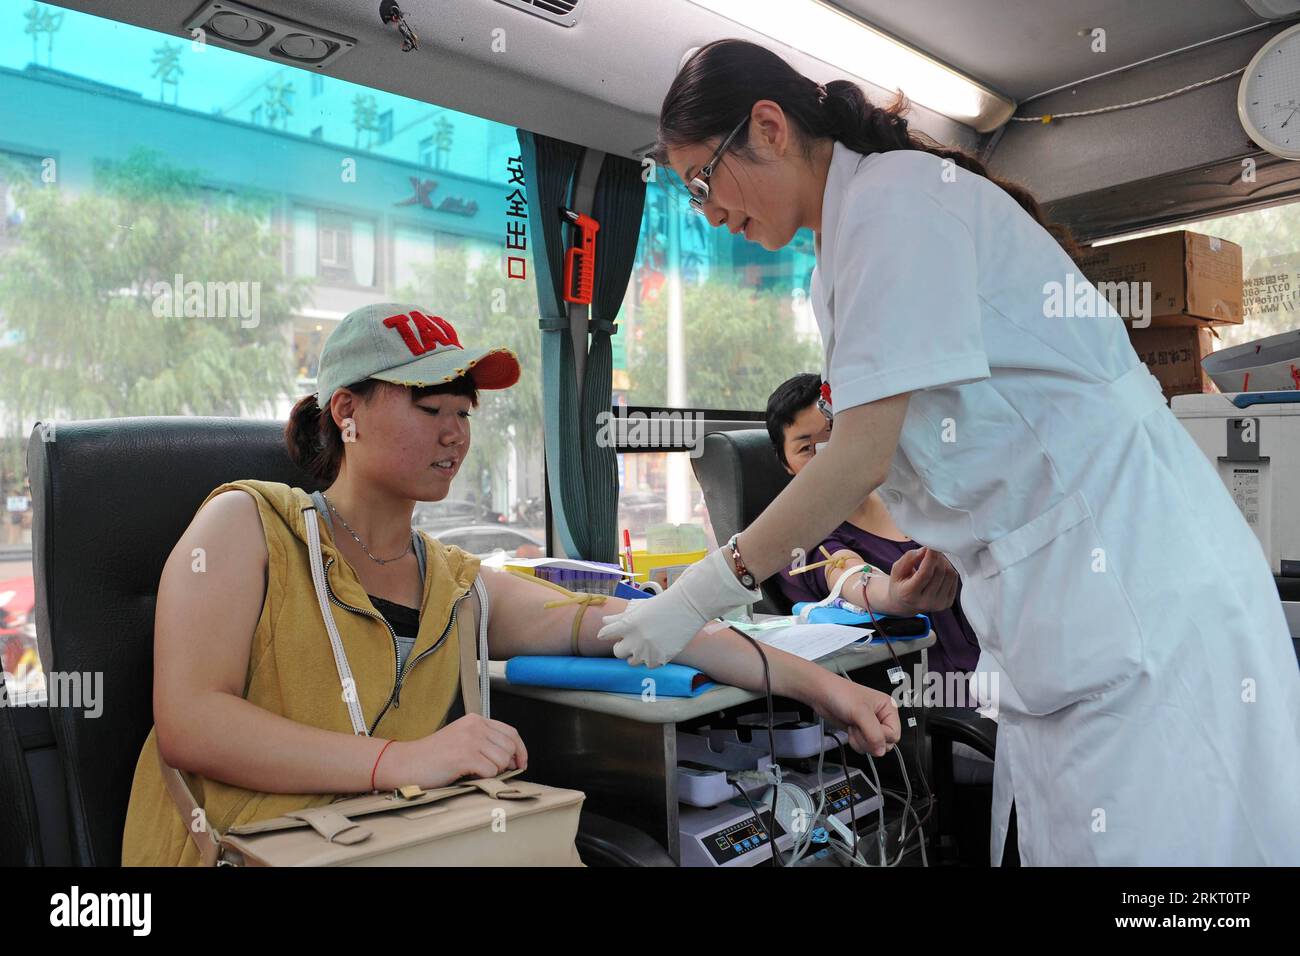 Bildnummer: 58340928  Datum: 13.08.2012  Copyright: imago/Xinhua (120813) -- TAIYUAN, Aug. 13, 2012 (Xinhua) -- donate blood on a blood donation vehicle in Taiyuan, capital of north China s Shanxi Province, Aug. 13, 2012. Many in Taiyuan donated their blood to back up reducing blood reserve in hospitals recently. (Xinhua/Fan Minda)(mcg) CHINA-TAIYUAN-BLOOD DONATION (CN) PUBLICATIONxNOTxINxCHN Gesellschaft Blutspende Blutspenden Blut Spenden xjh x0x 2012 quer      58340928 Date 13 08 2012 Copyright Imago XINHUA  Taiyuan Aug 13 2012 XINHUA Donate Blood ON a Blood Donation Vehicle in Taiyuan Capi Stock Photo